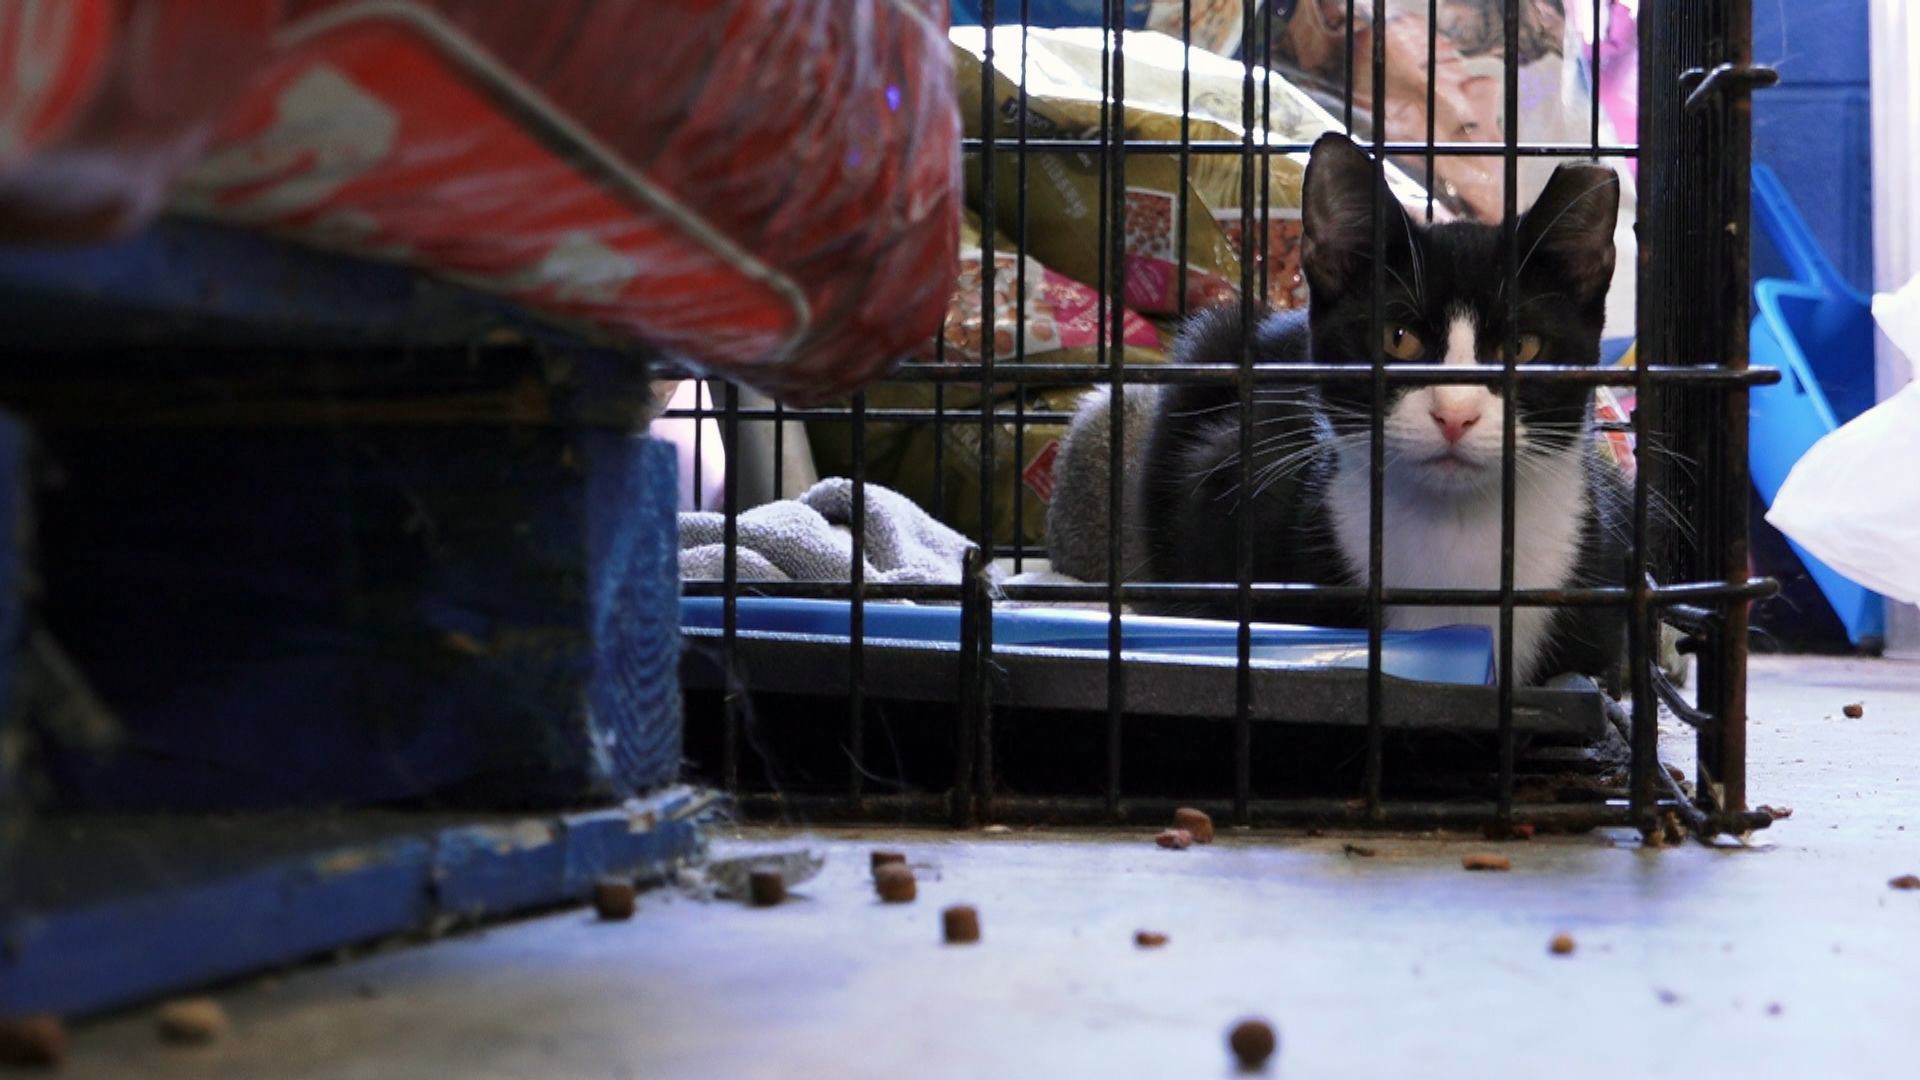 She could not say no': Cocke Co. shelter rescues 109 hoarded cats from  mobile home 